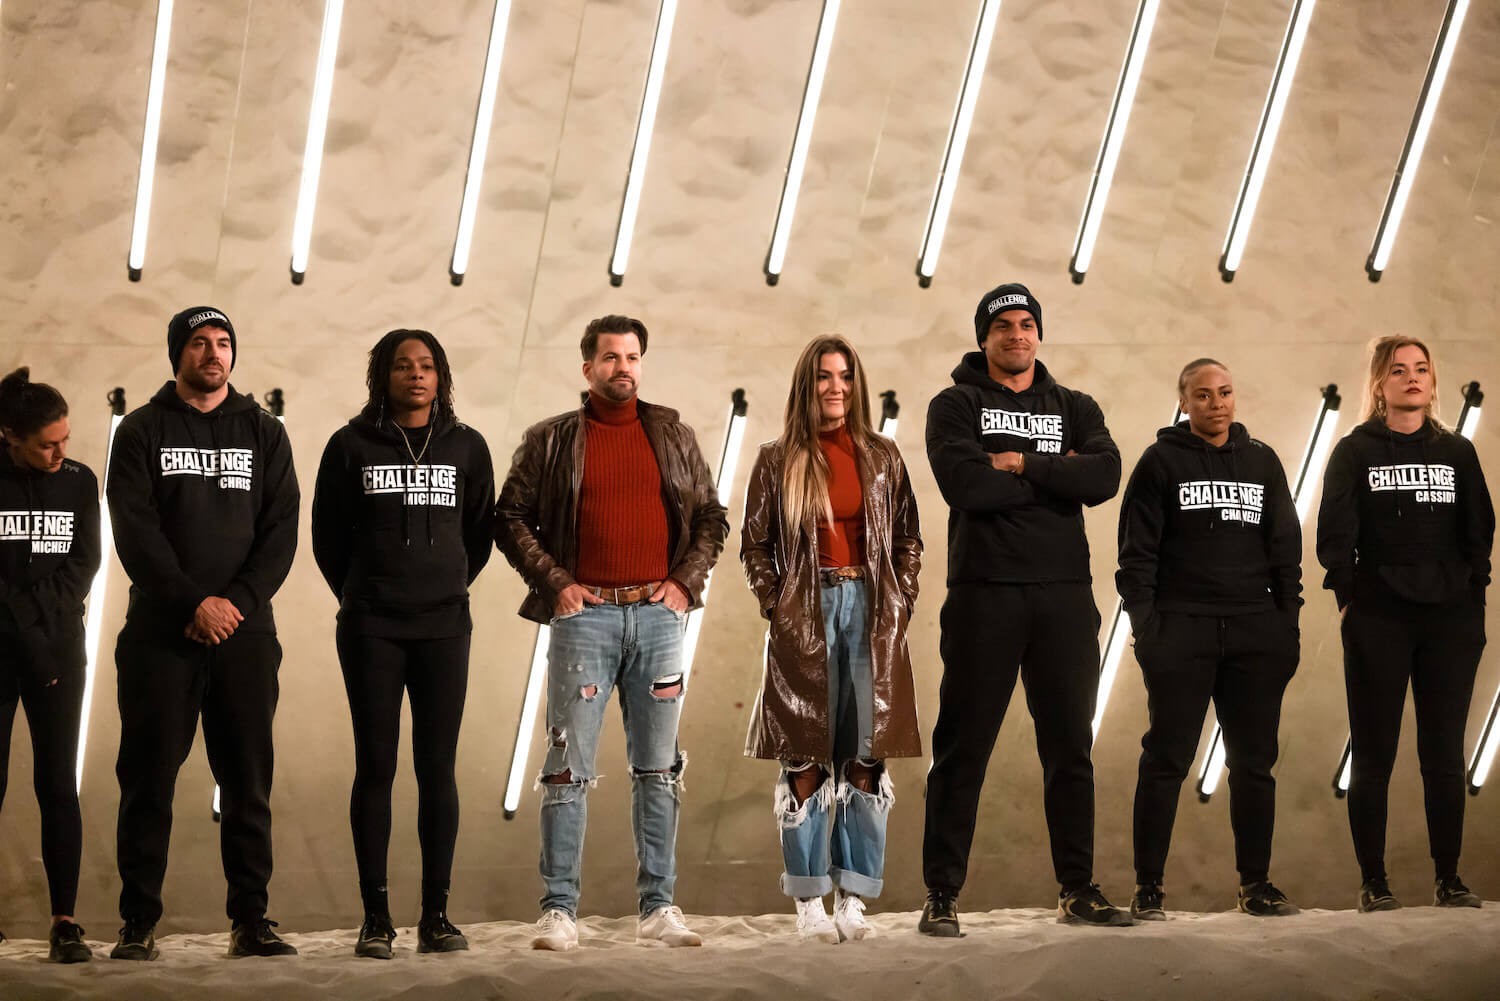 'The Challenge: USA' Season 2 cast members in a line before an elimination